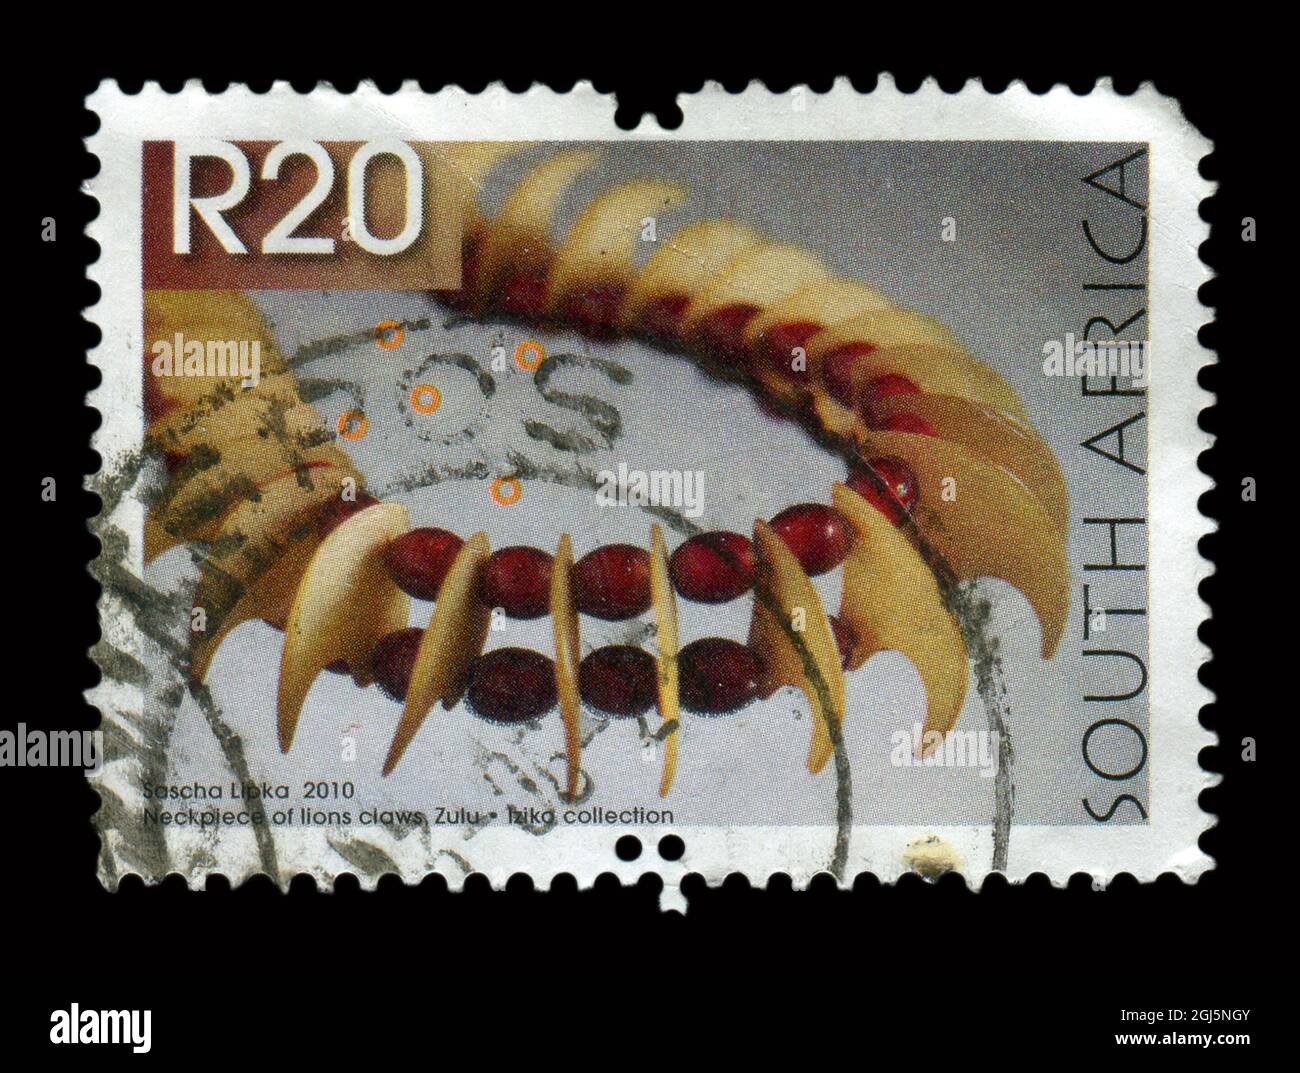 Stamp printed in South Africa shows image of the Neckpiece of lions claws, Zulu, circa 2010. Stock Photo